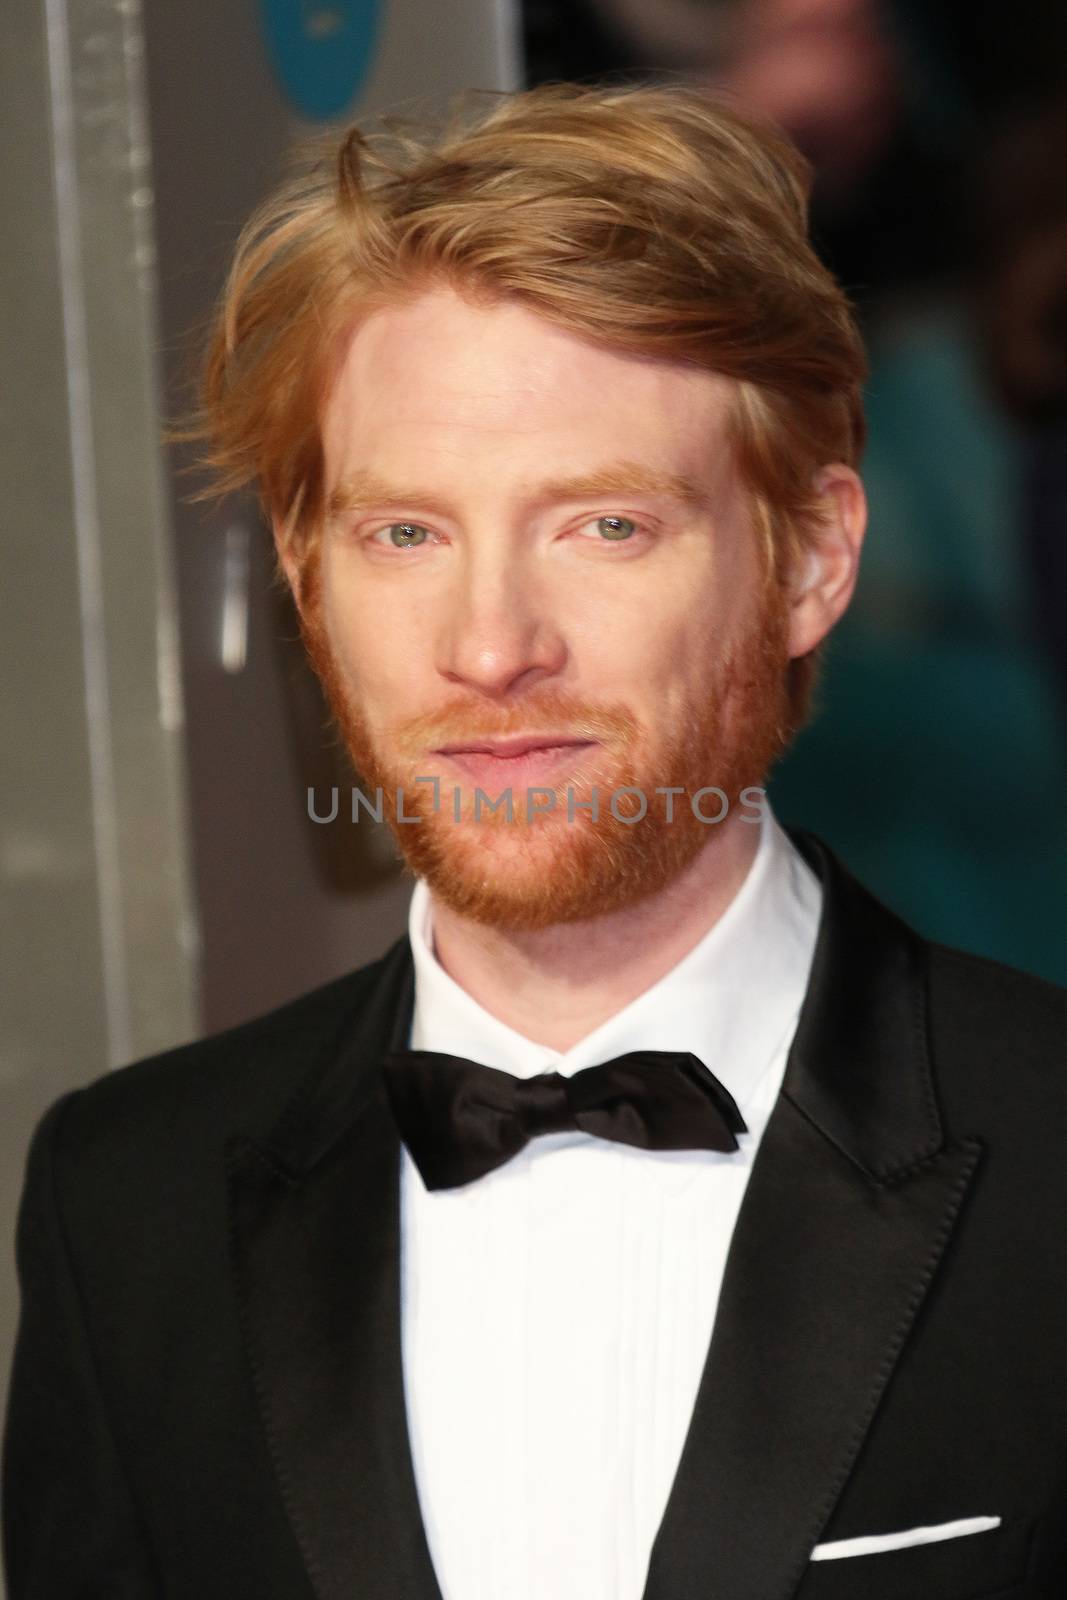 UK, London: Irish actor Domhnall Gleeson poses on the red Carpet at the EE British Academy Film Awards, BAFTA Awards, at the Royal Opera House in London, England, on 14 February 2016.